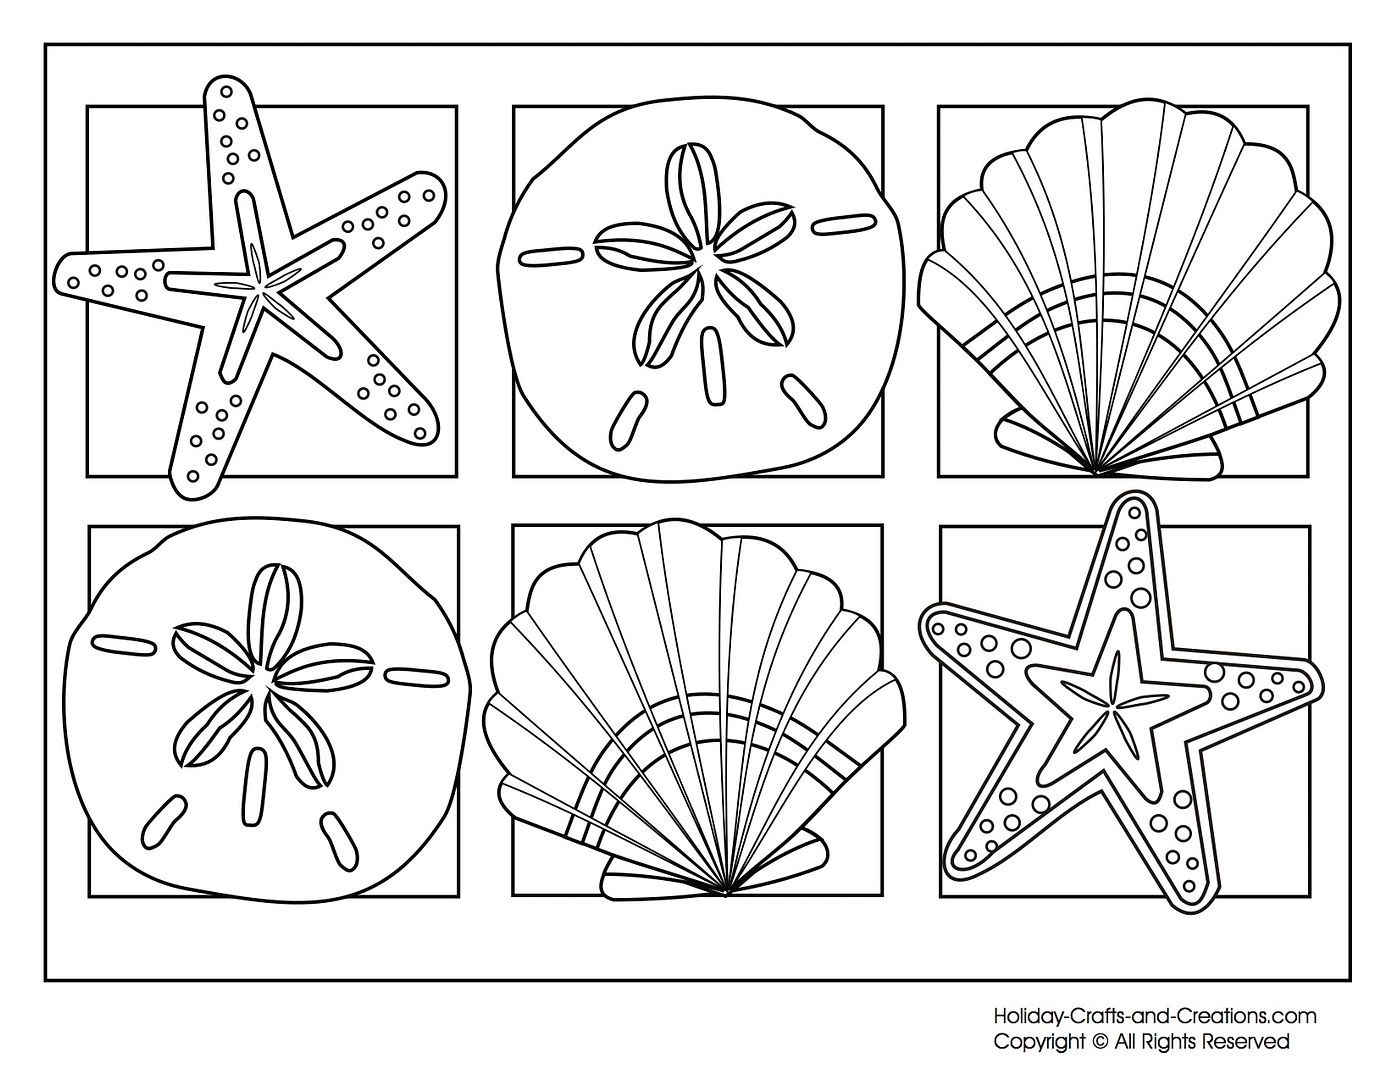 Free summer coloring pages: 6 seashells 